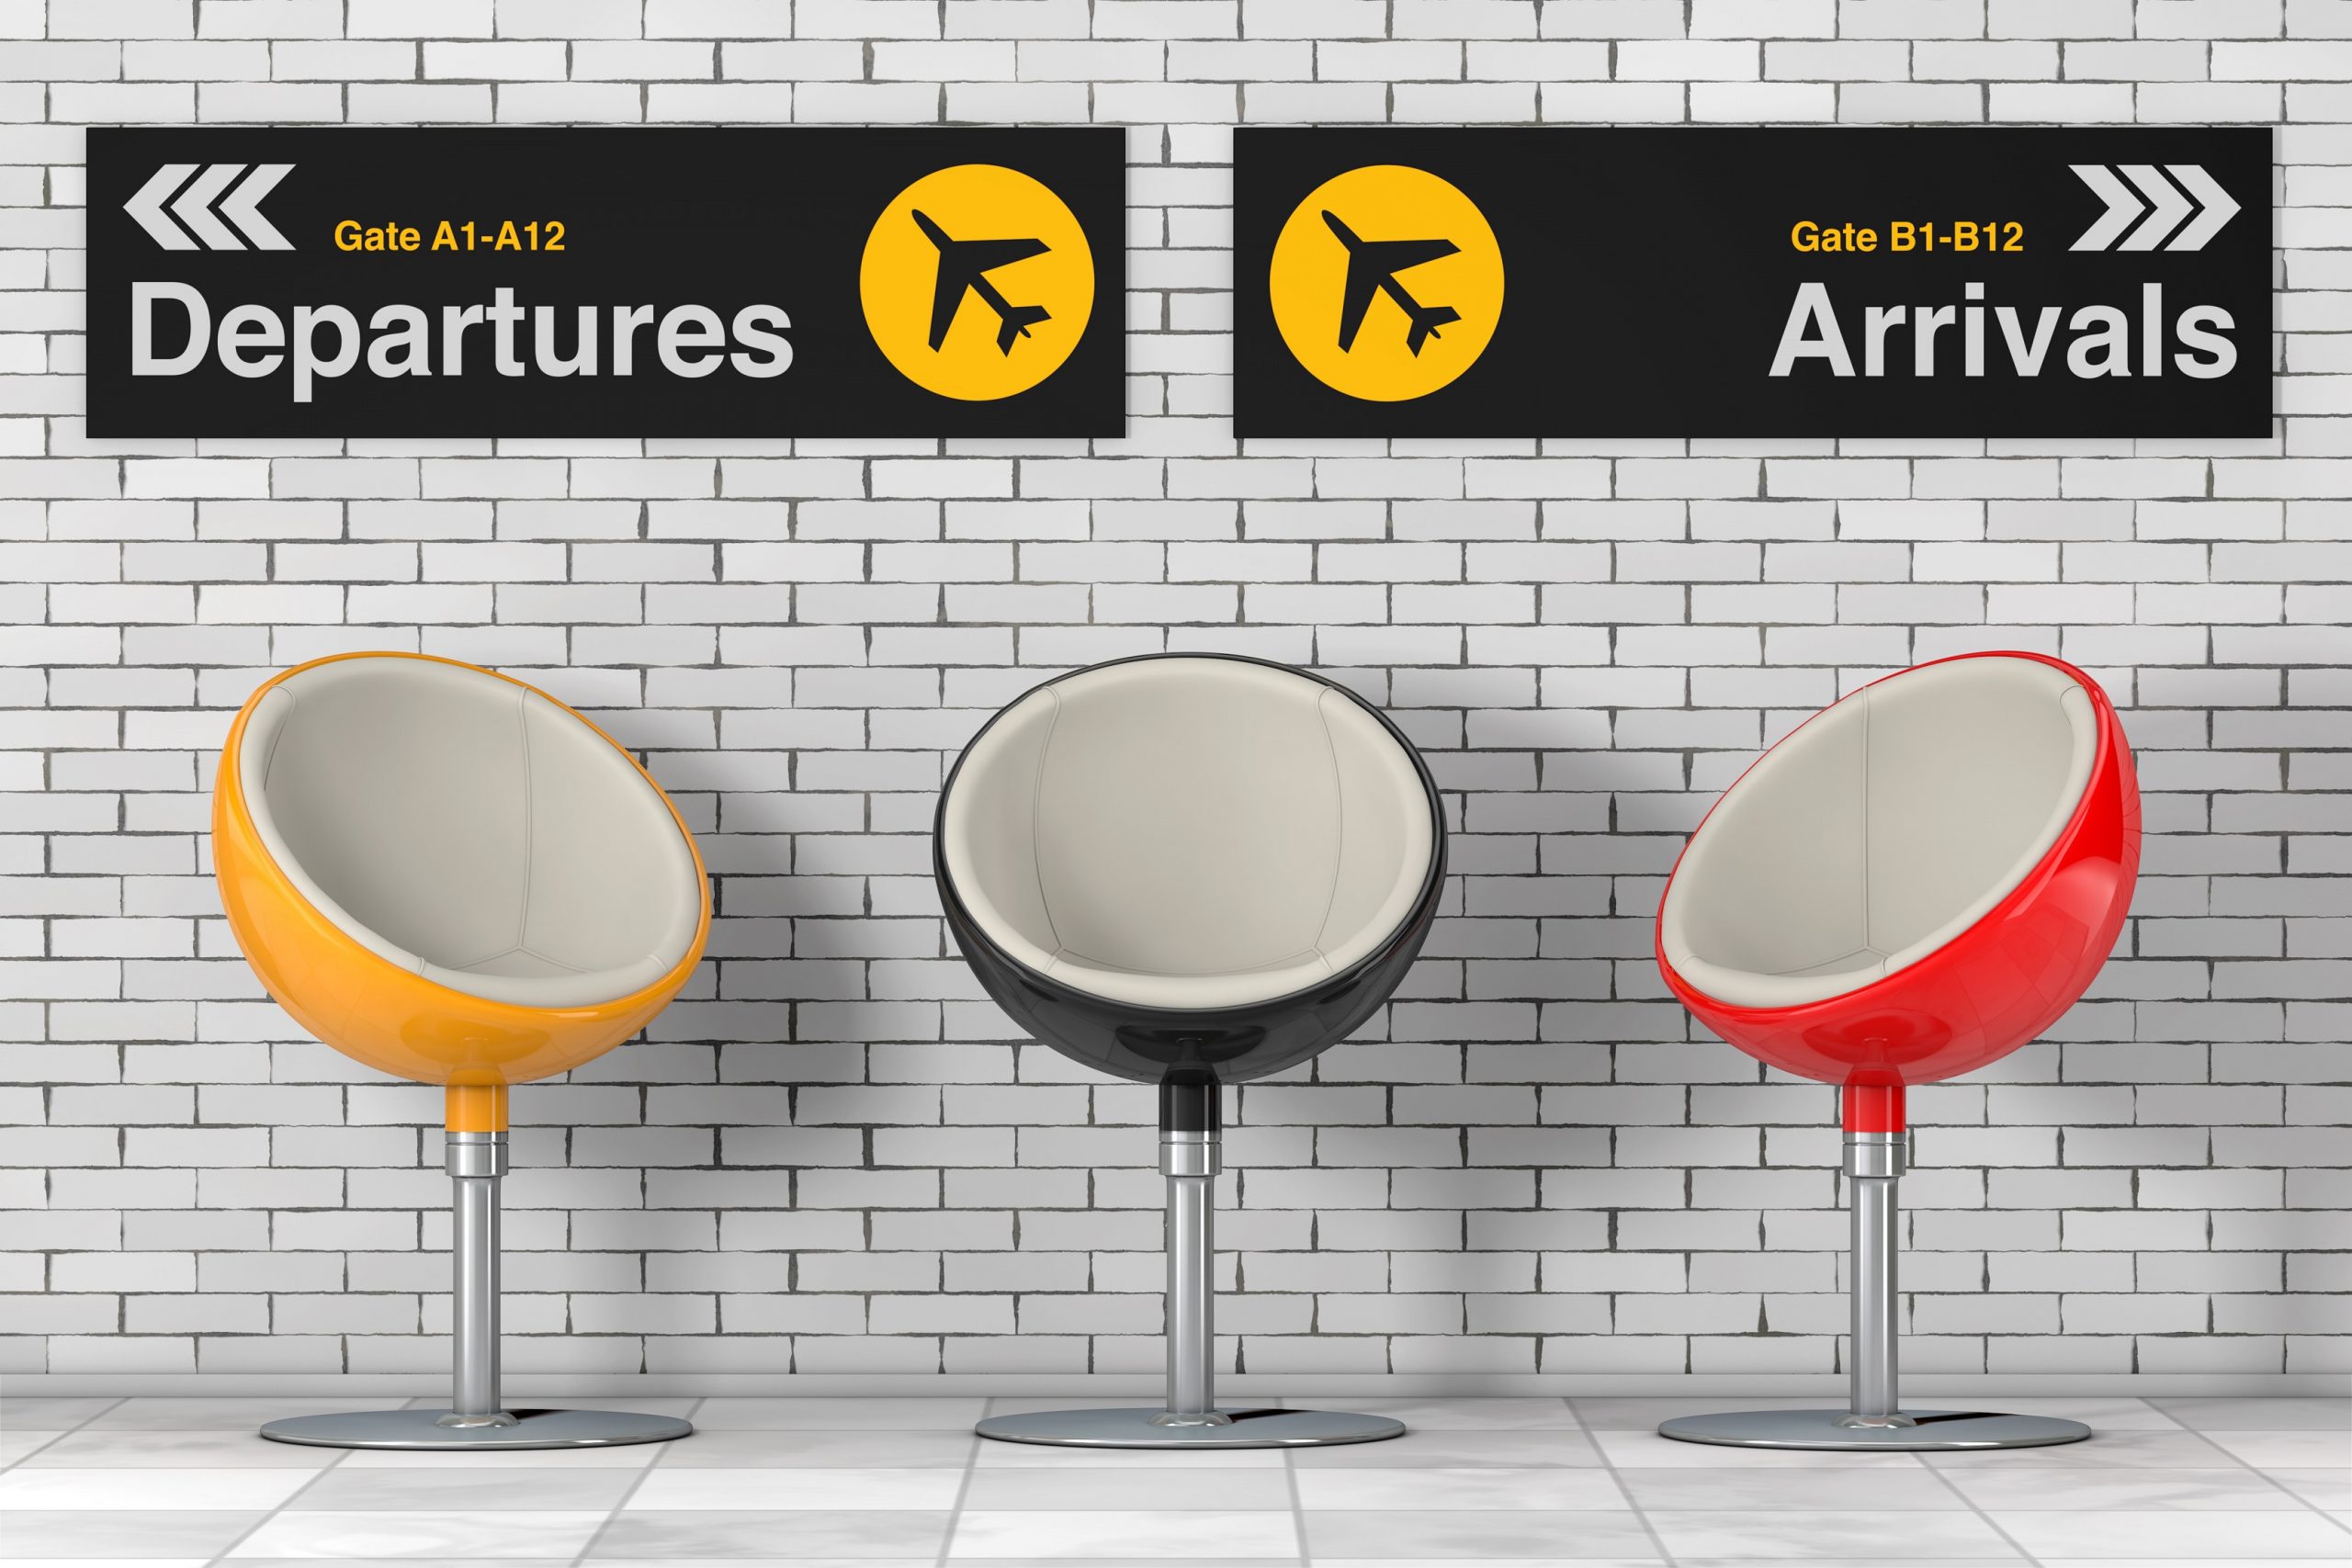 Modern Multicolor Ball Chairs near Airport Departures and Arrivals Information Panel in front of Brick Wall. 3d Rendering